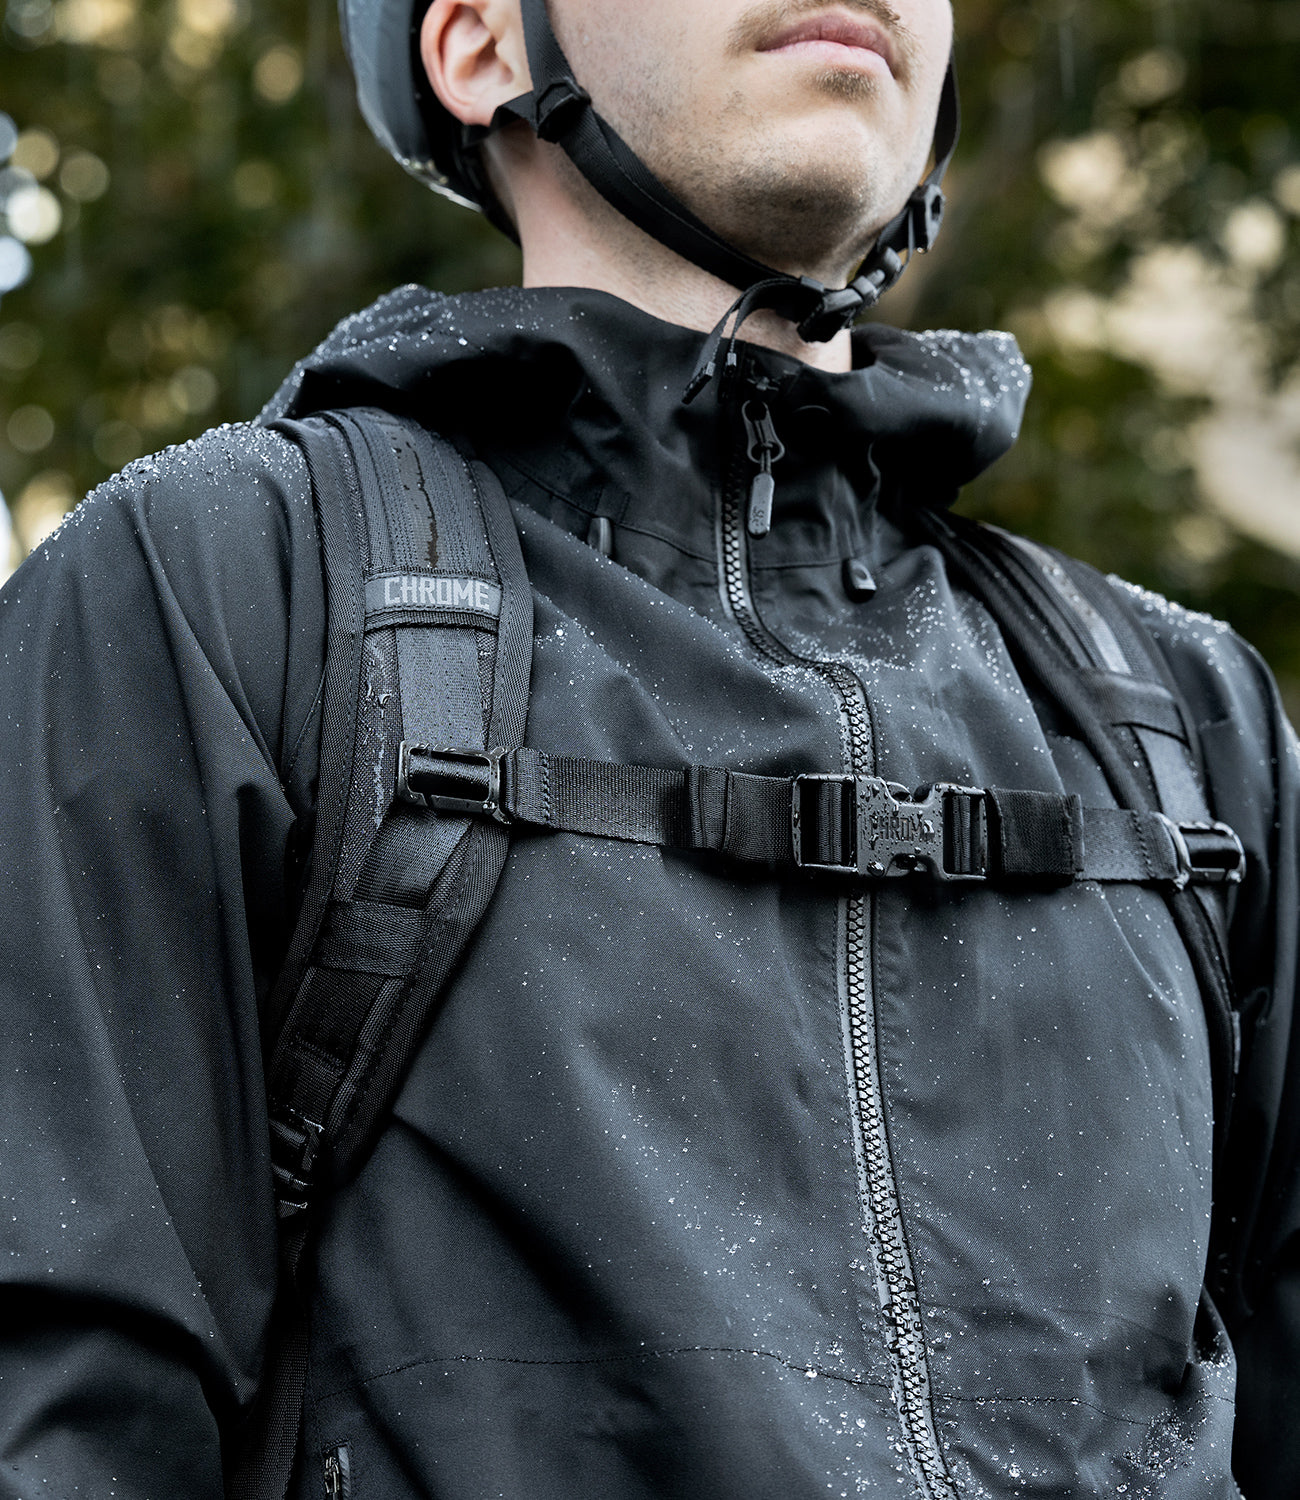 Men's Storm Salute Commute Jacket worn by a guy mobile image